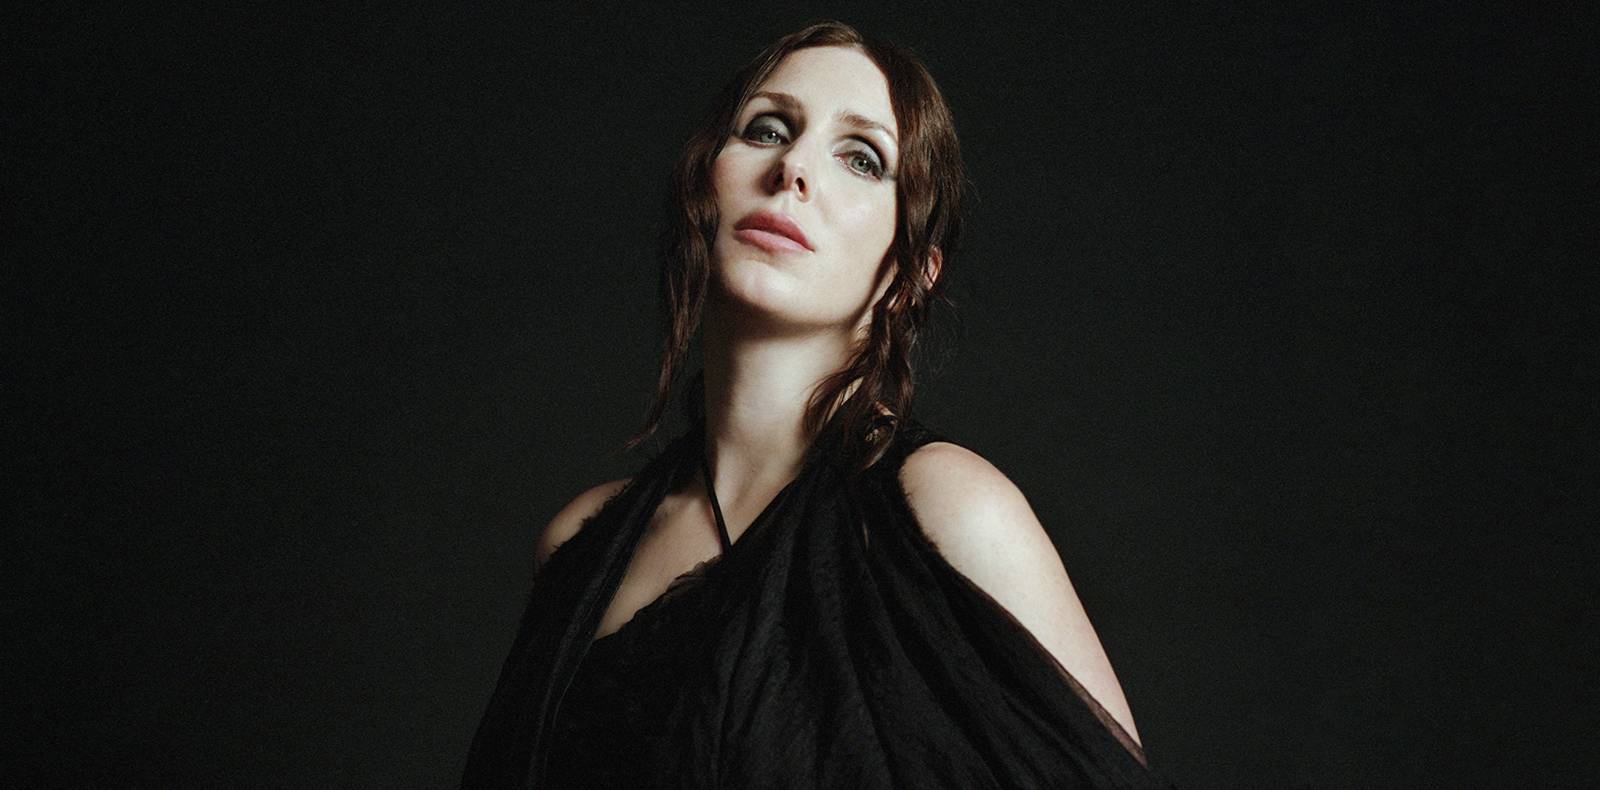 Chelsea Wolfe, She Reaches Out To She Reaches Out To She, Game of Thrones, Interview